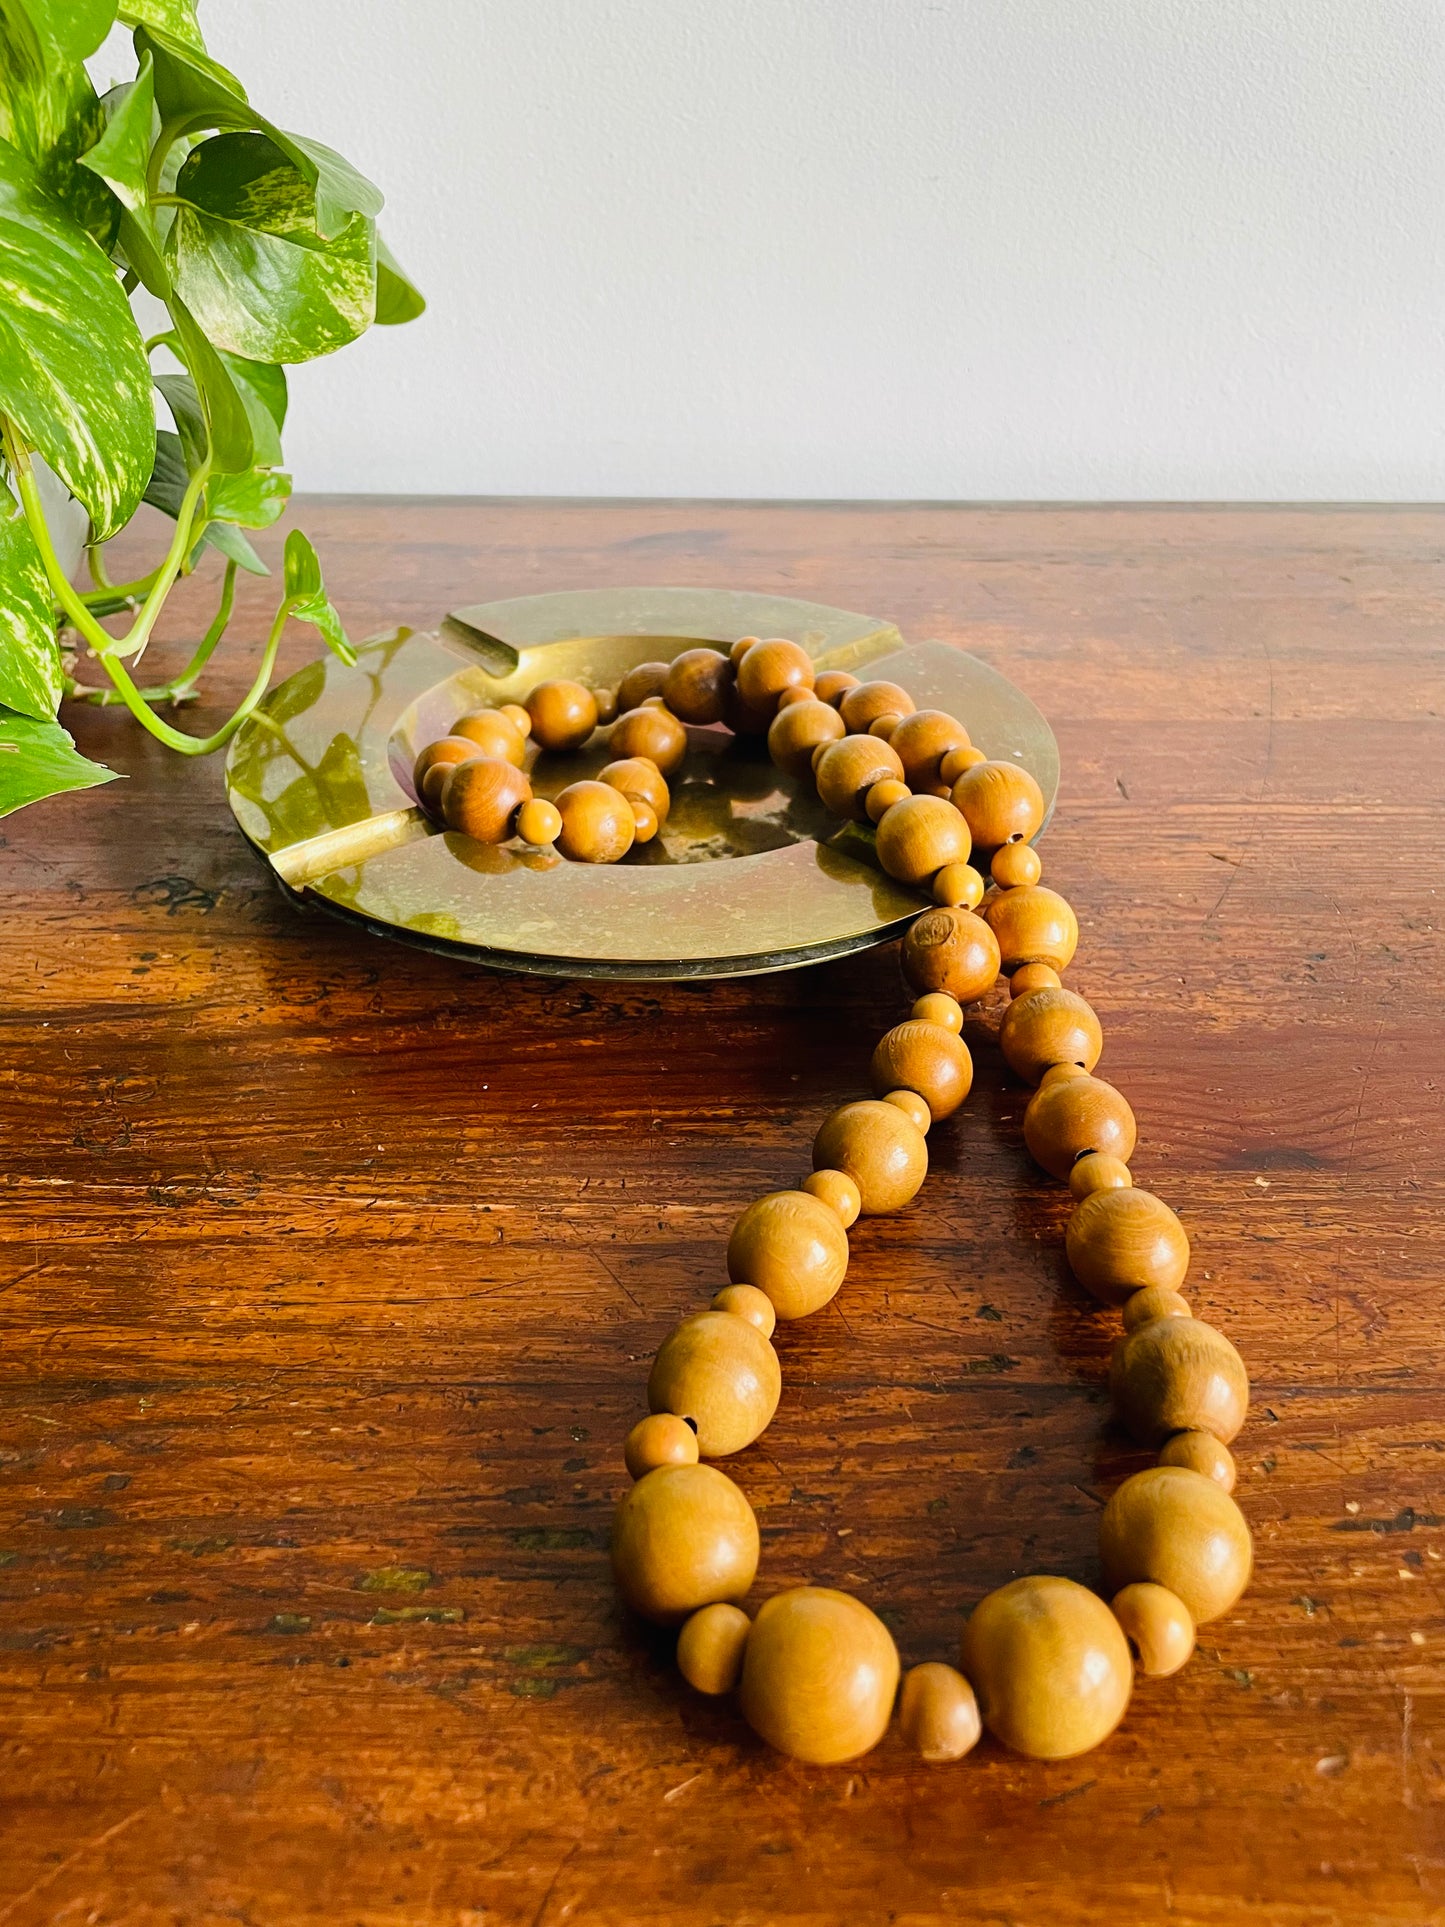 Solid Wood Beads on Rope - Necklace or Decor Piece